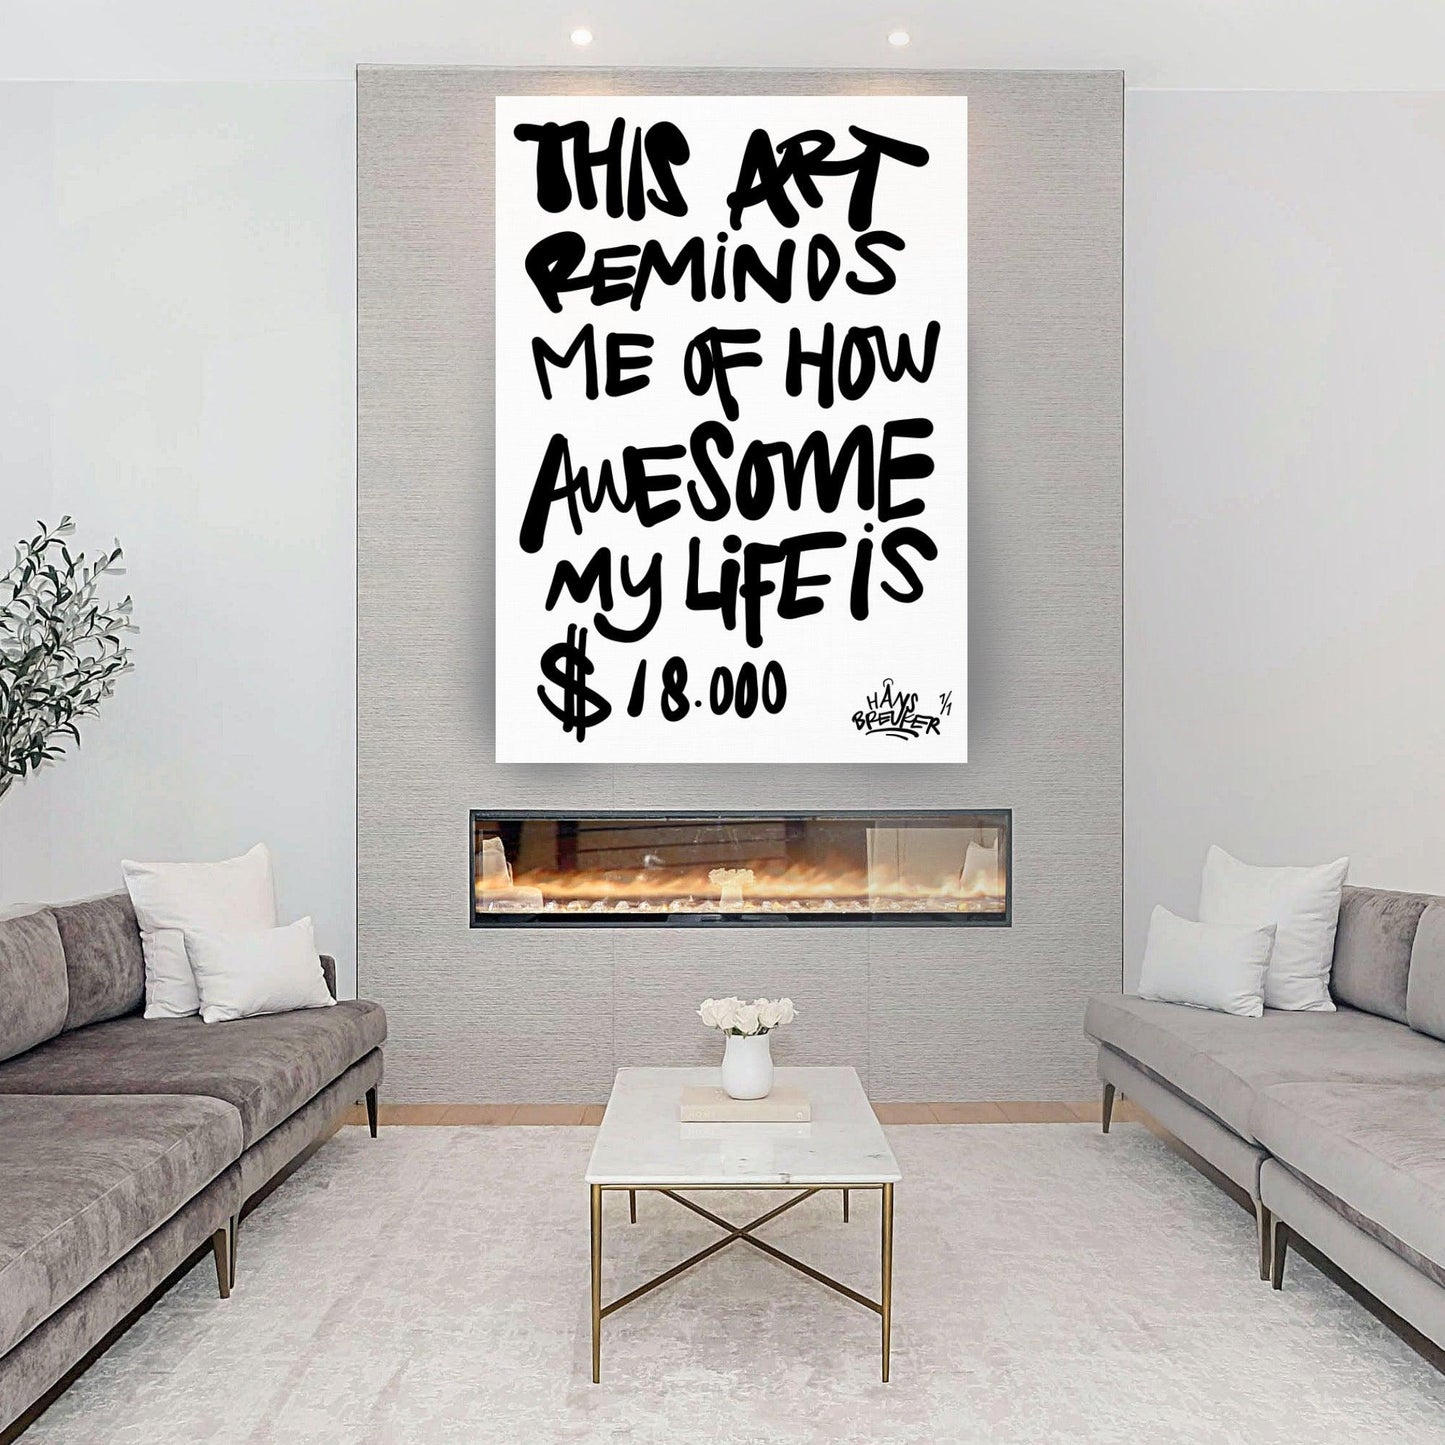 This art show me of how awesome my life is $18.000 - Hans Breuker